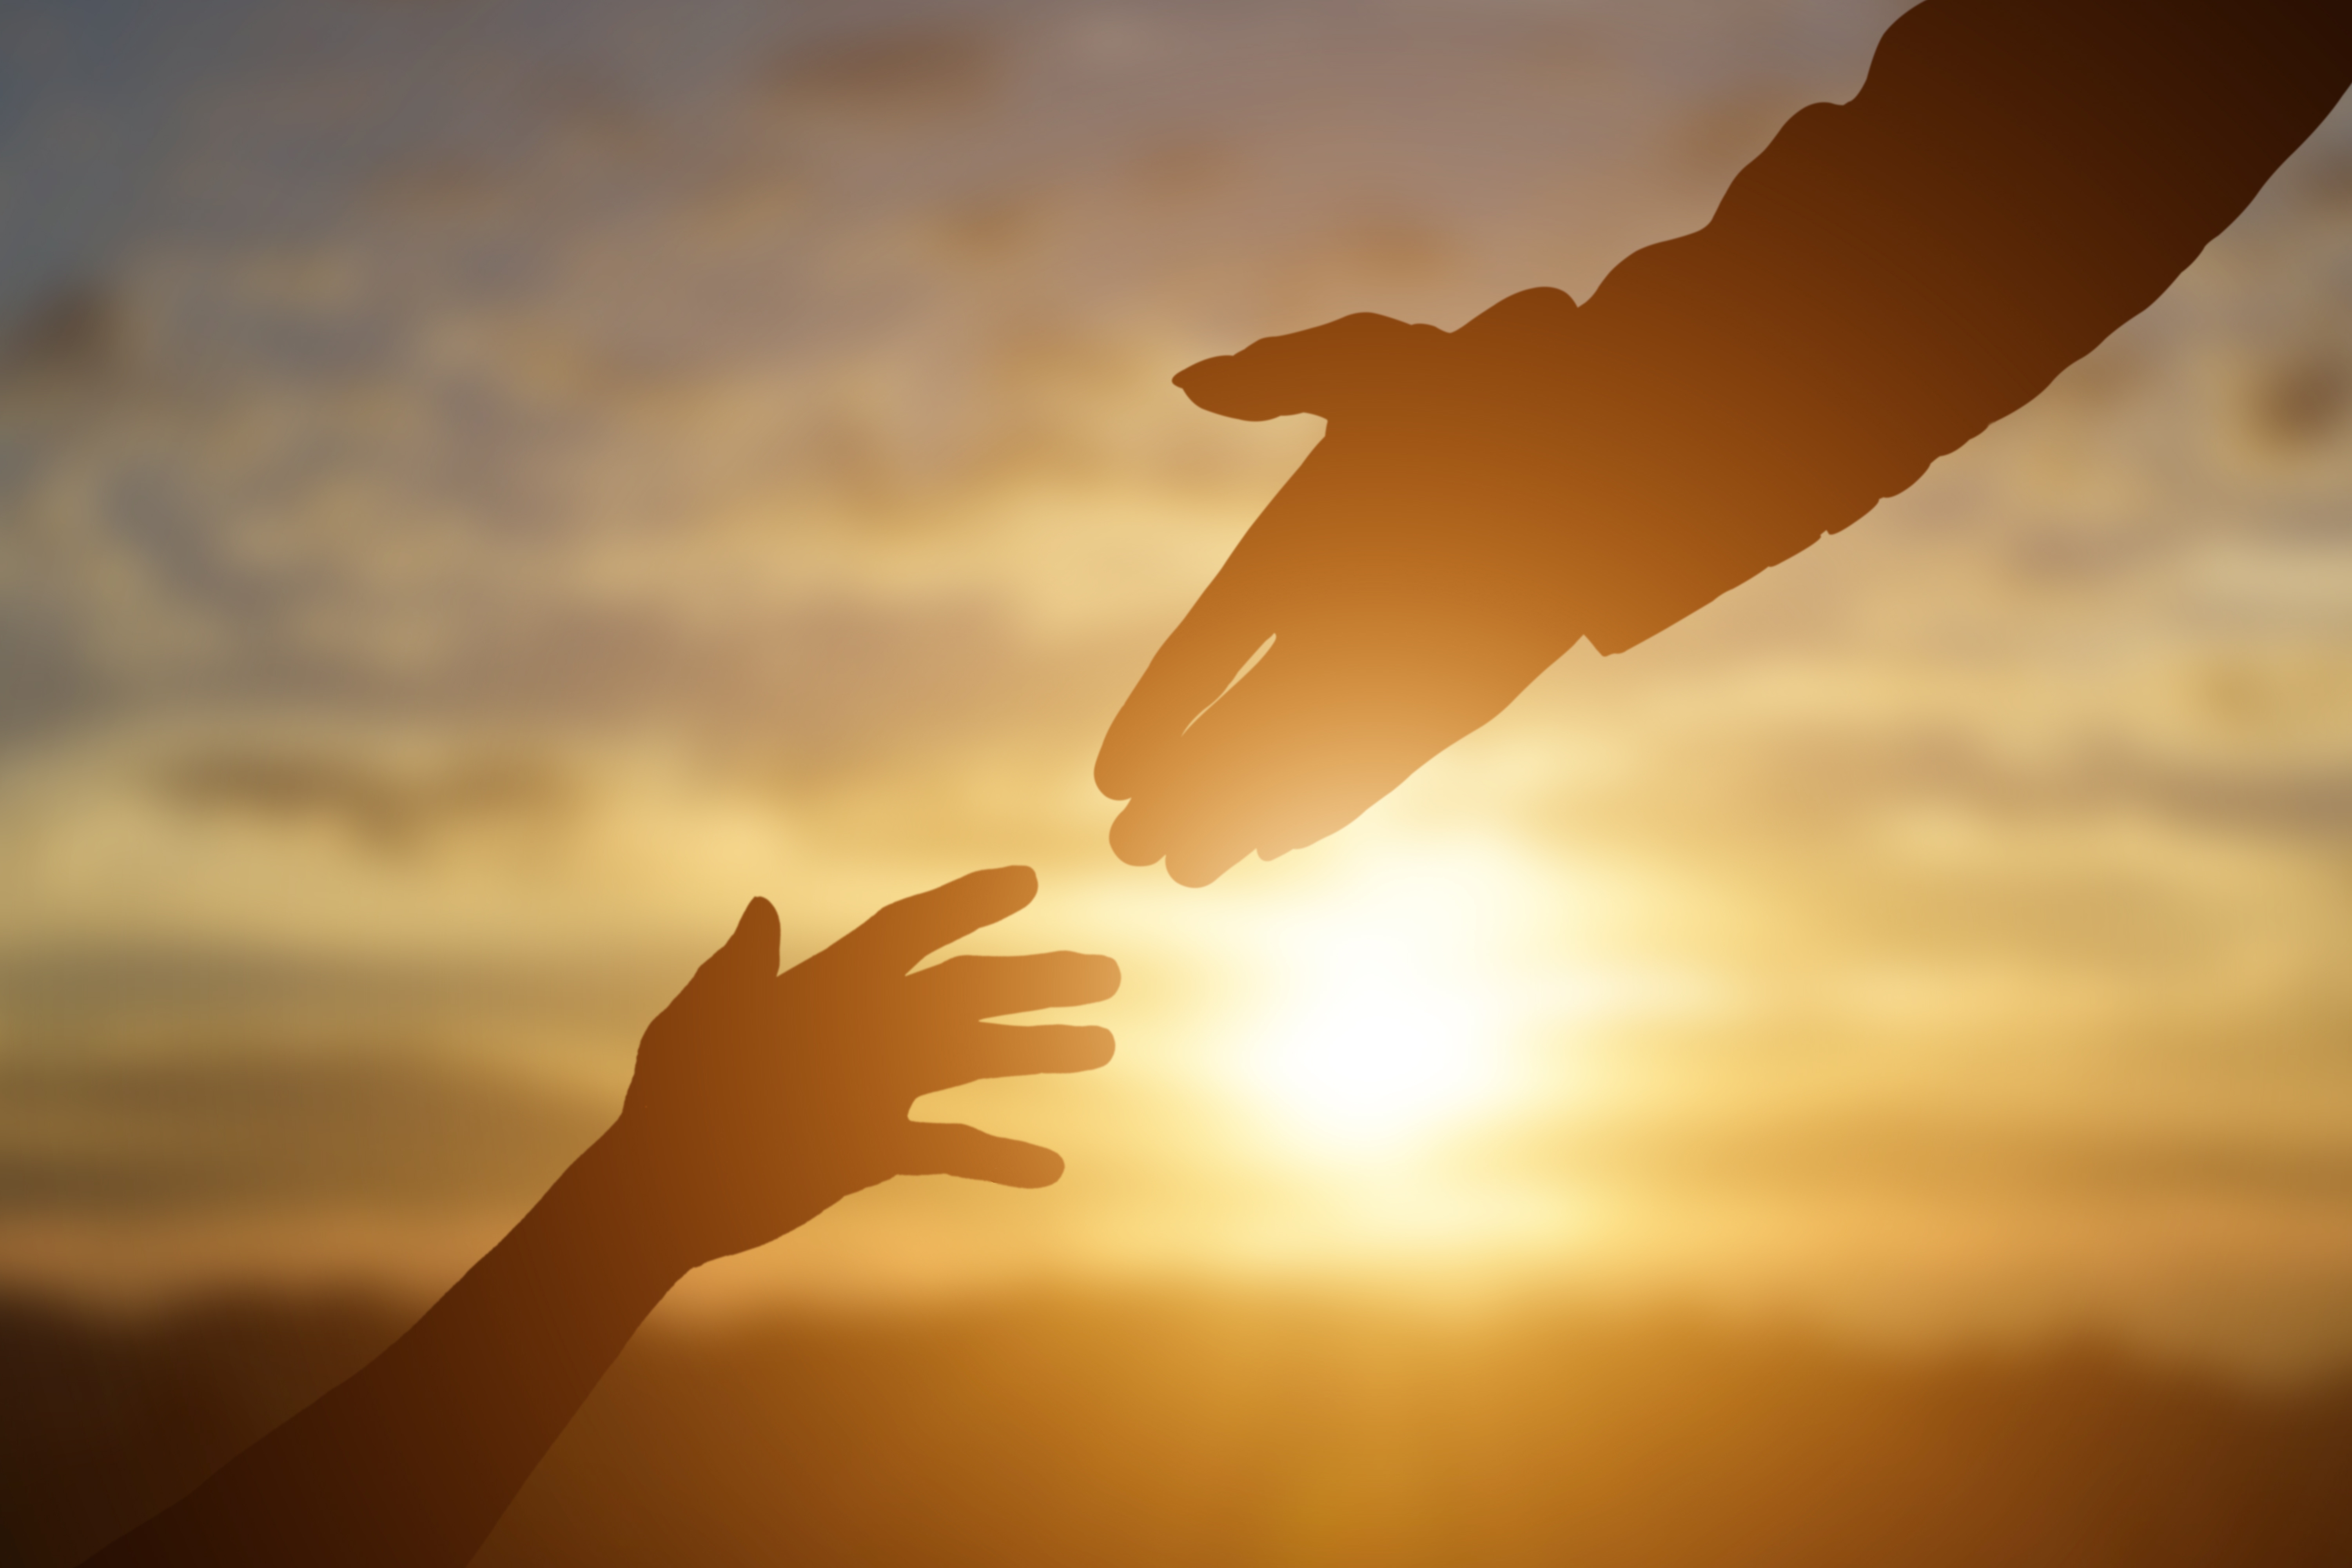 Silhouette of giving a help hand, hope and support each other over sunset